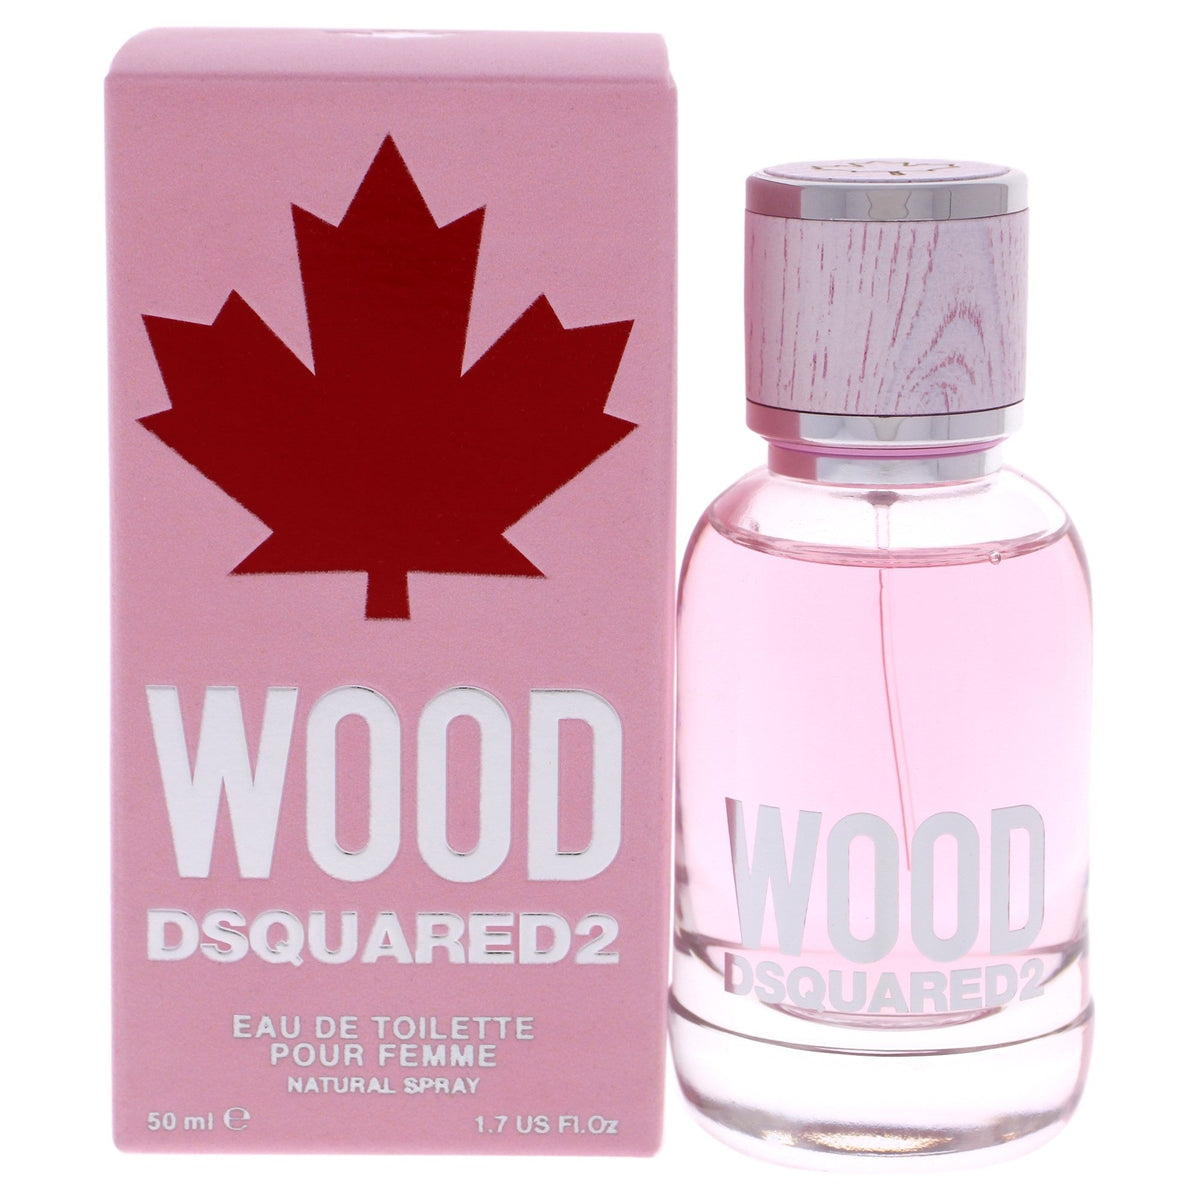 Wood  Dsquared2 Edt Spray 1.7 Oz (50 Ml) For Women  5A30